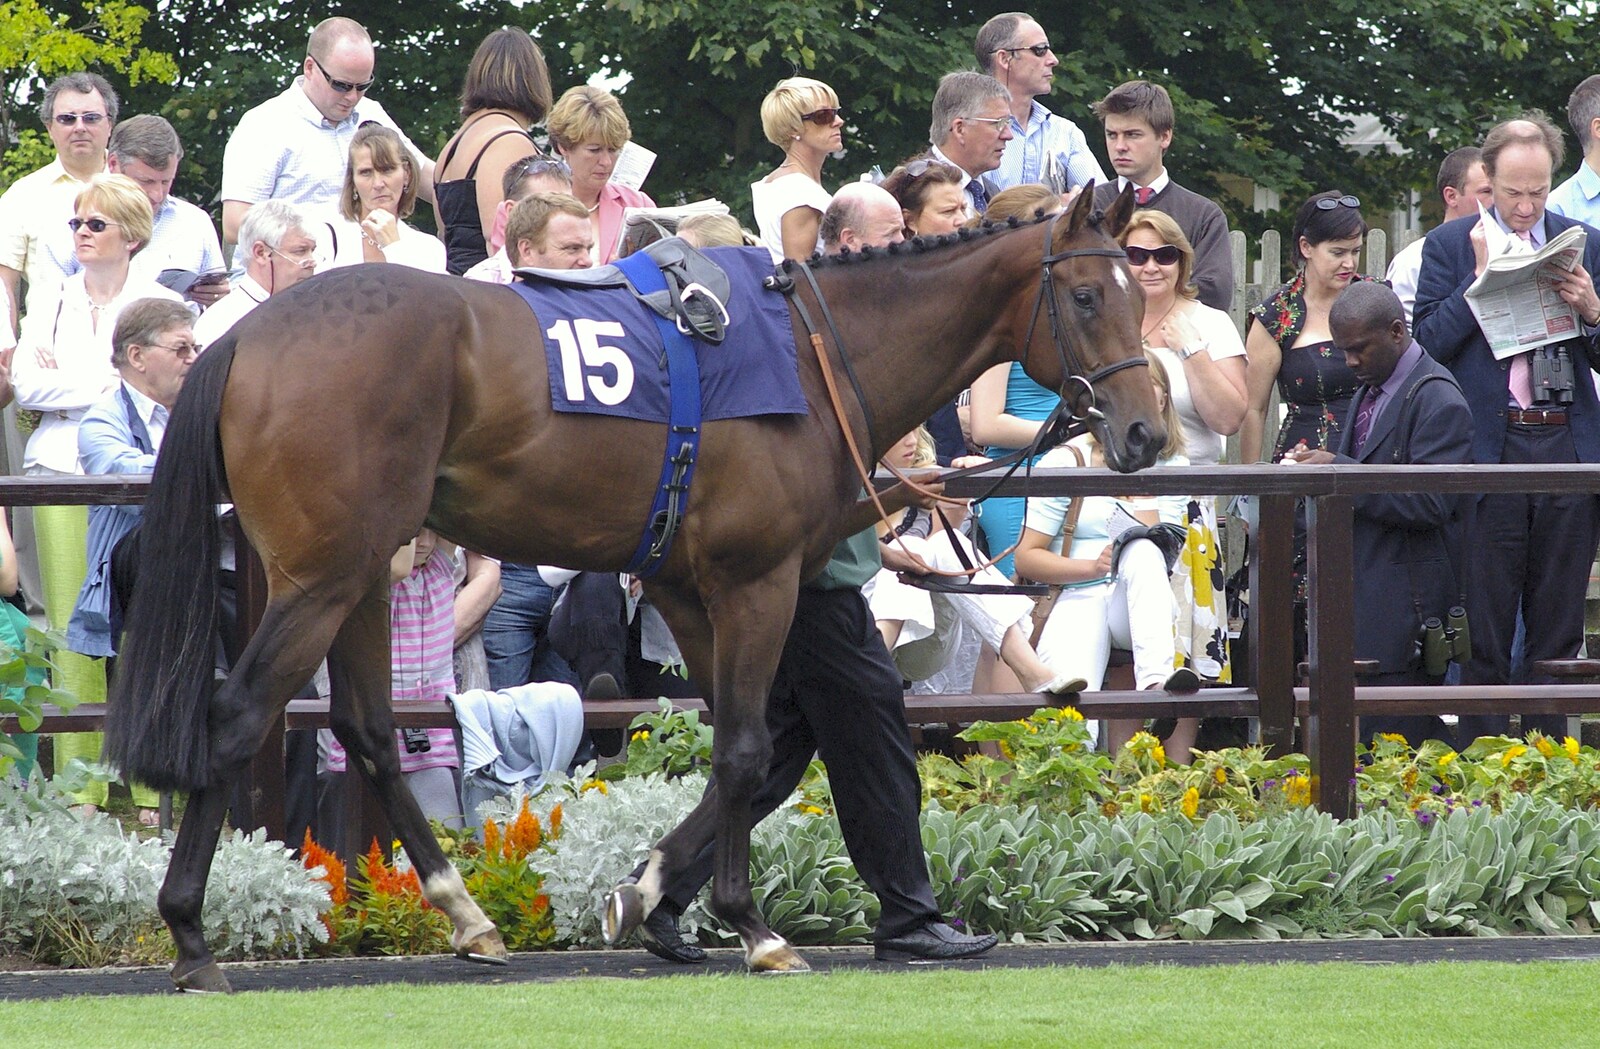 A Day At The Races, Newmarket, Suffolk - 23rd August 2008: Another impressive horse